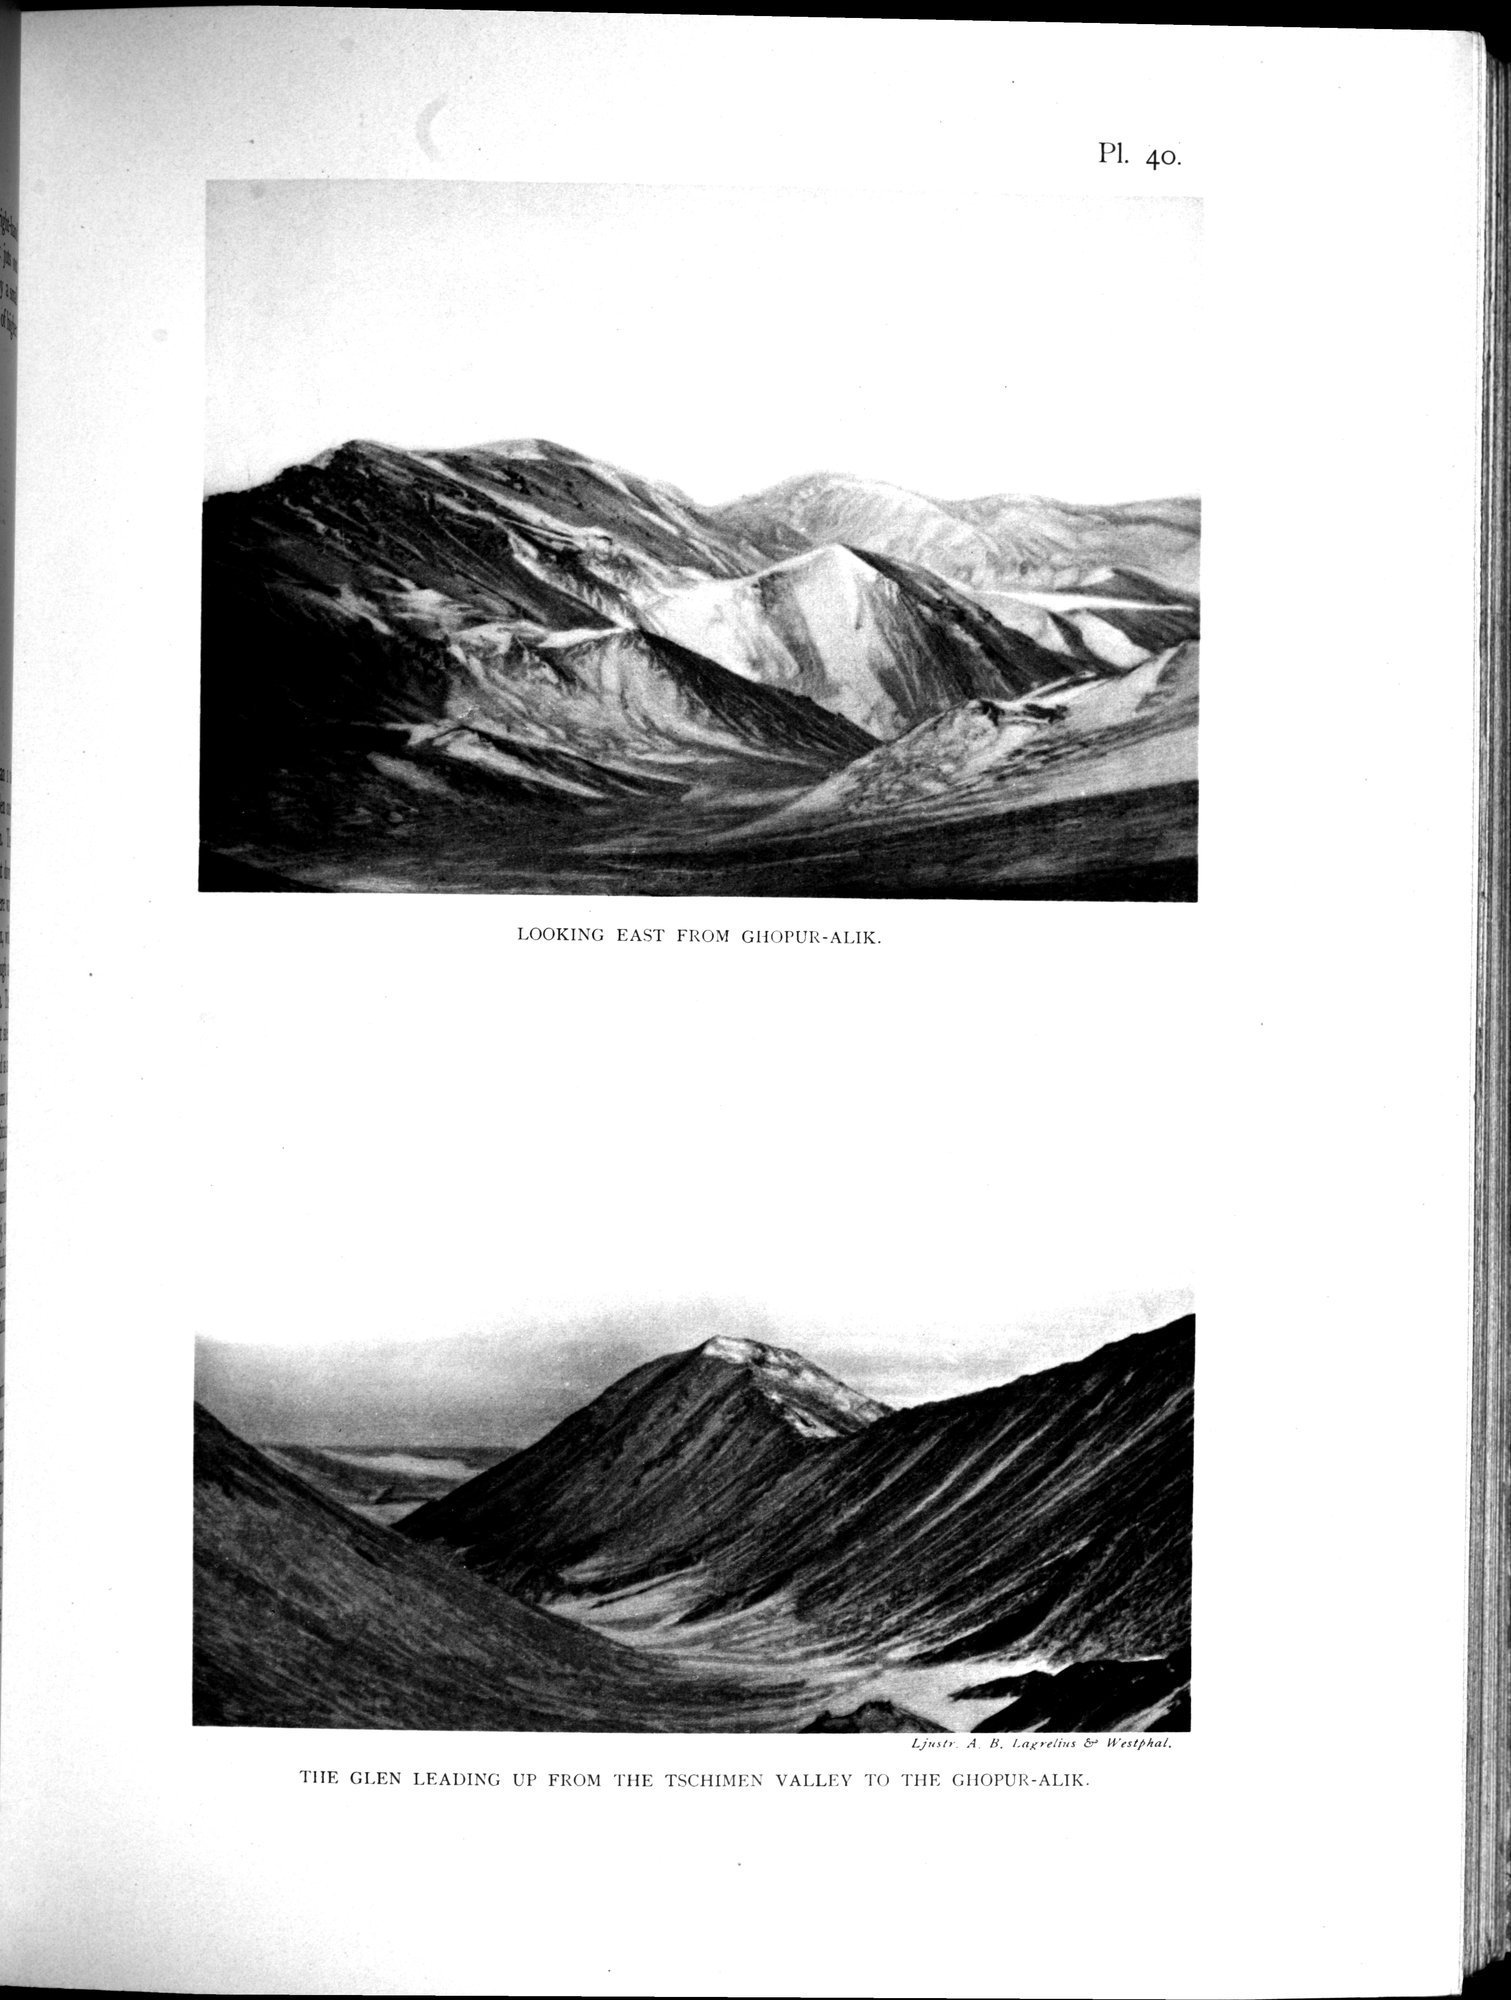 Scientific Results of a Journey in Central Asia, 1899-1902 : vol.3 / 363 ページ（白黒高解像度画像）